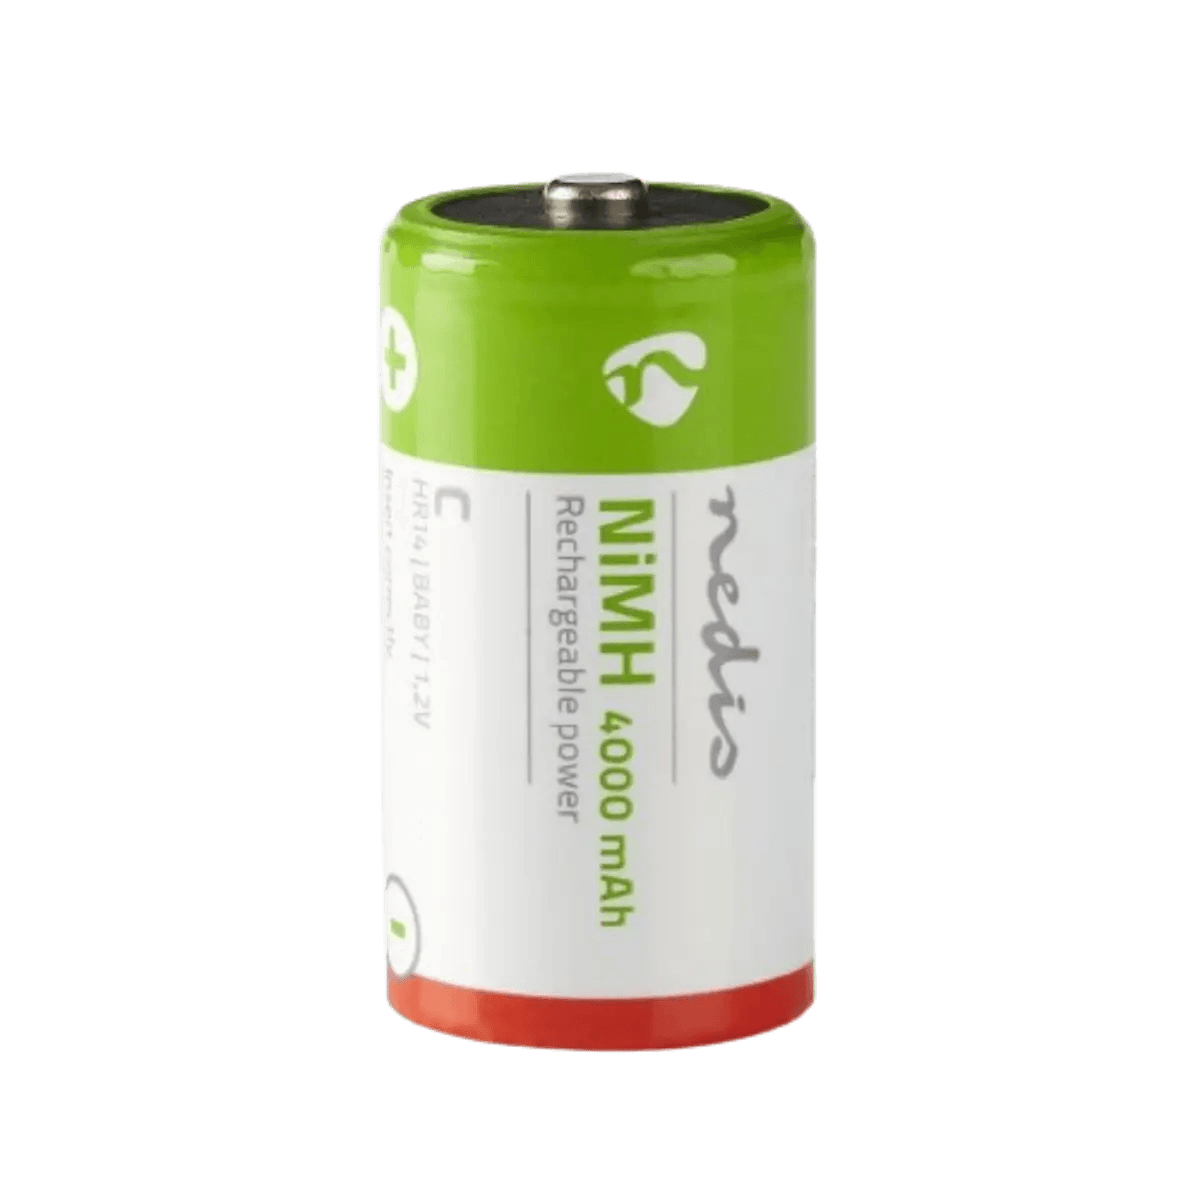 2x Piles Rechargeables Ni-Mh C 4000mah 1.2v